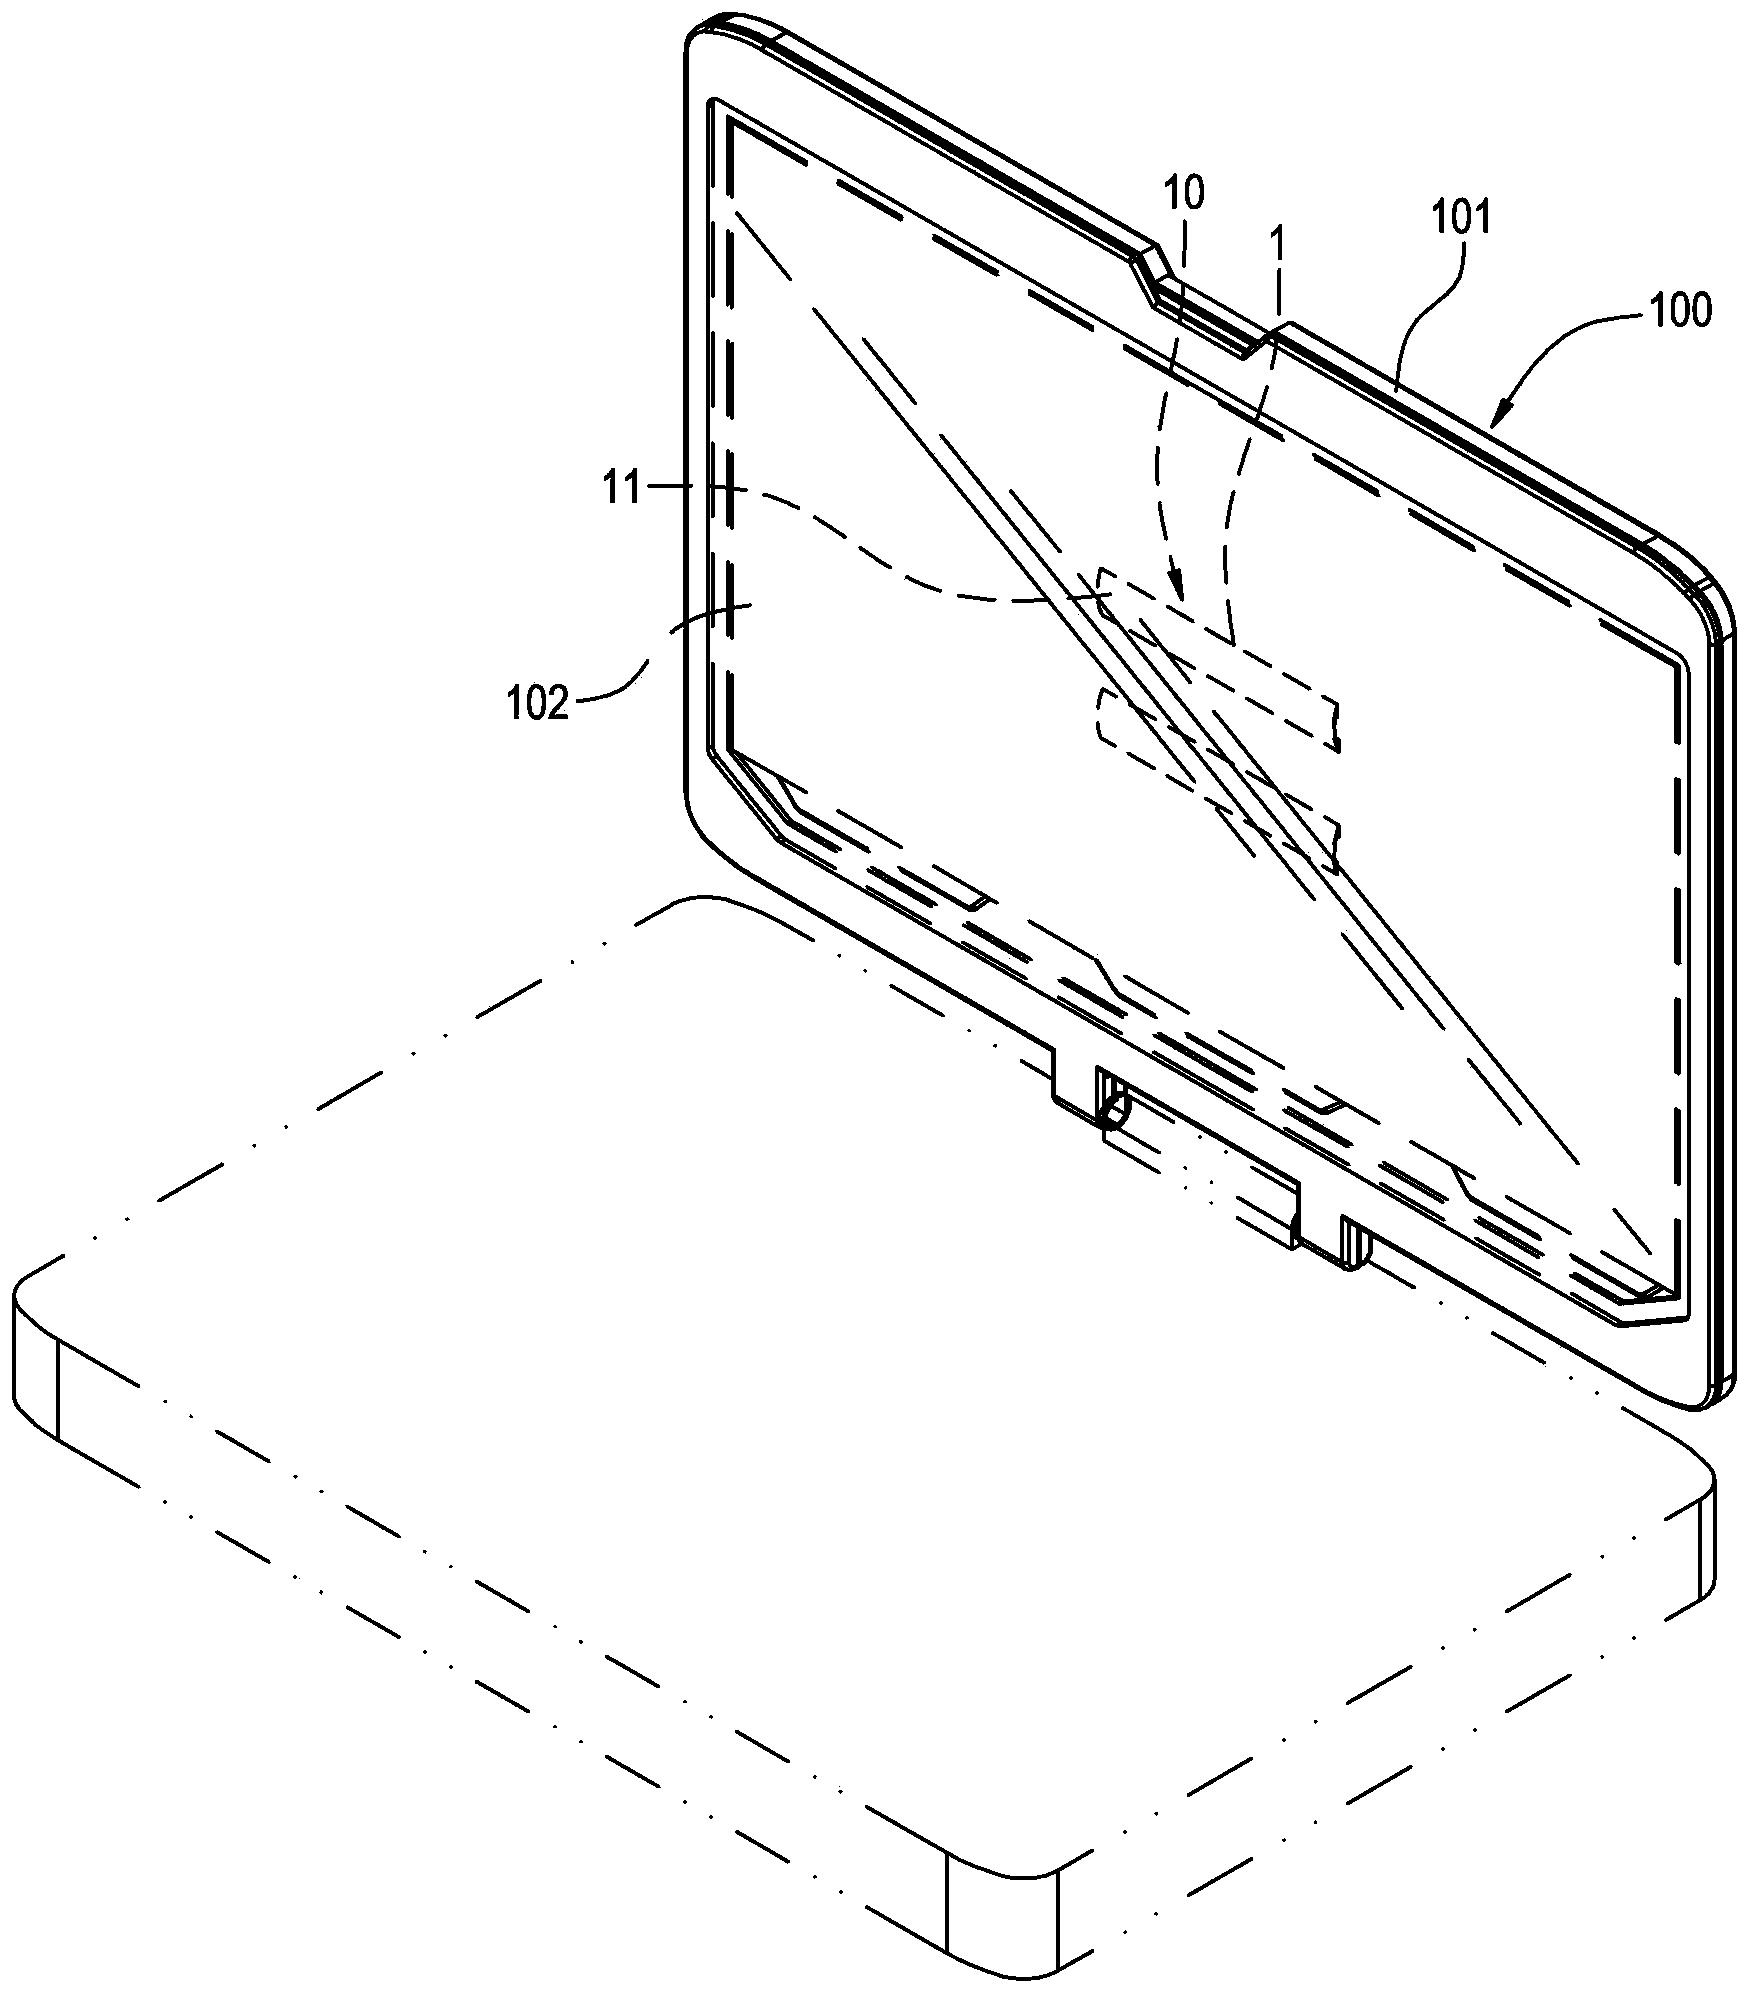 Pressure-resistance structure of electronic device